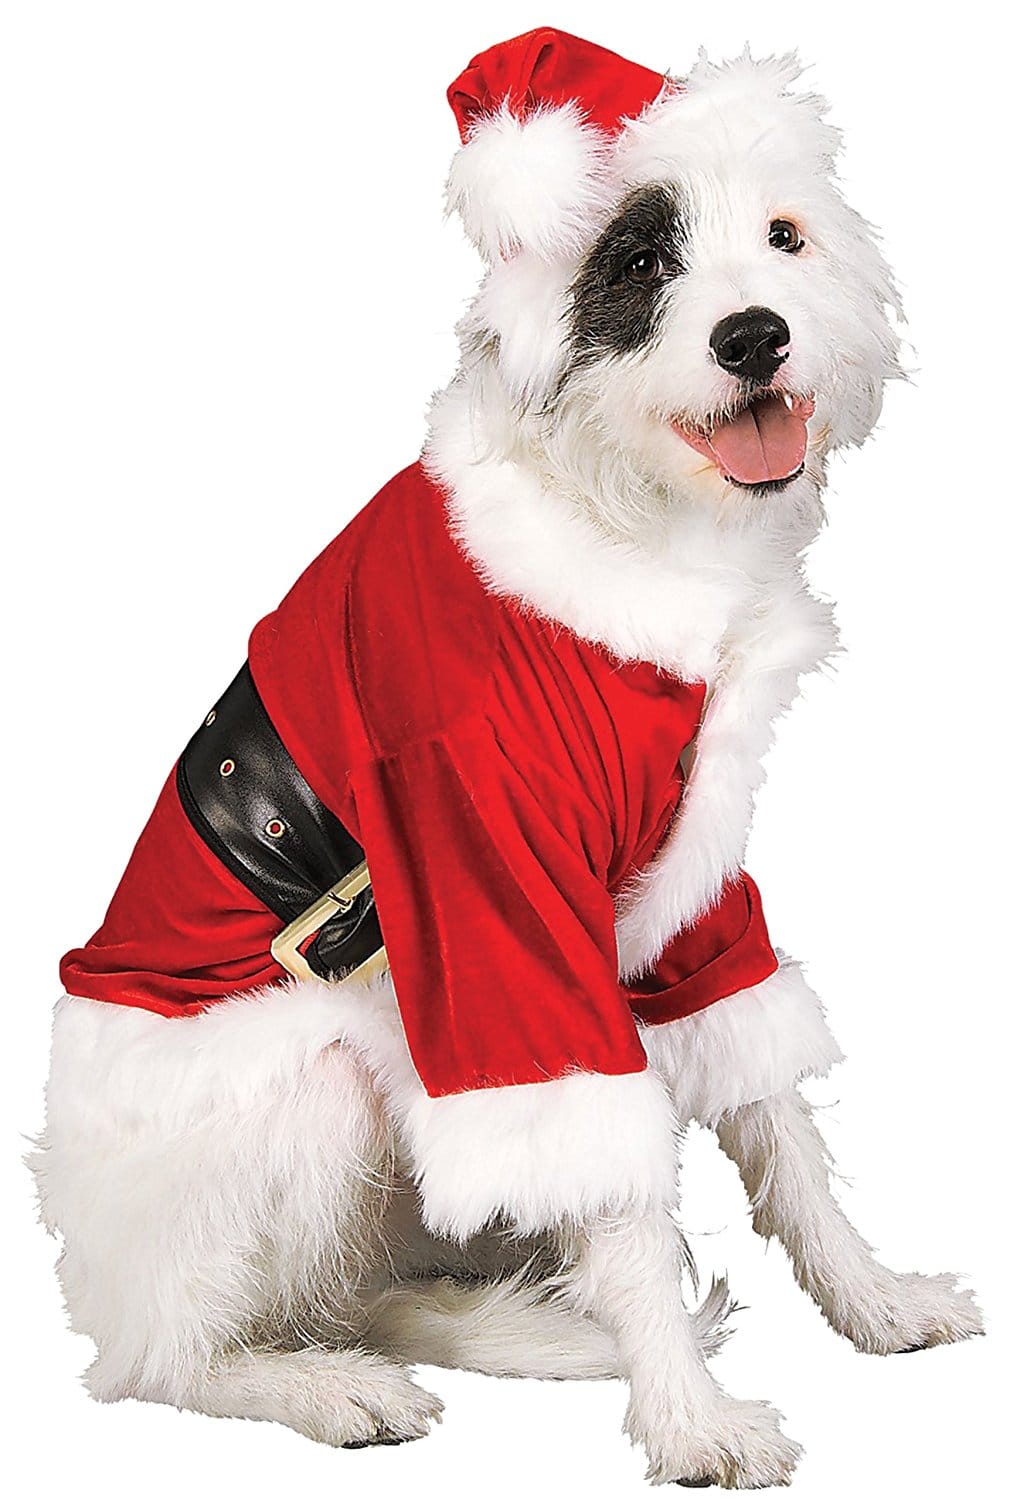 Best Dog Christmas Sweater 2017: Santa Outfit for Dogs Costume 2018